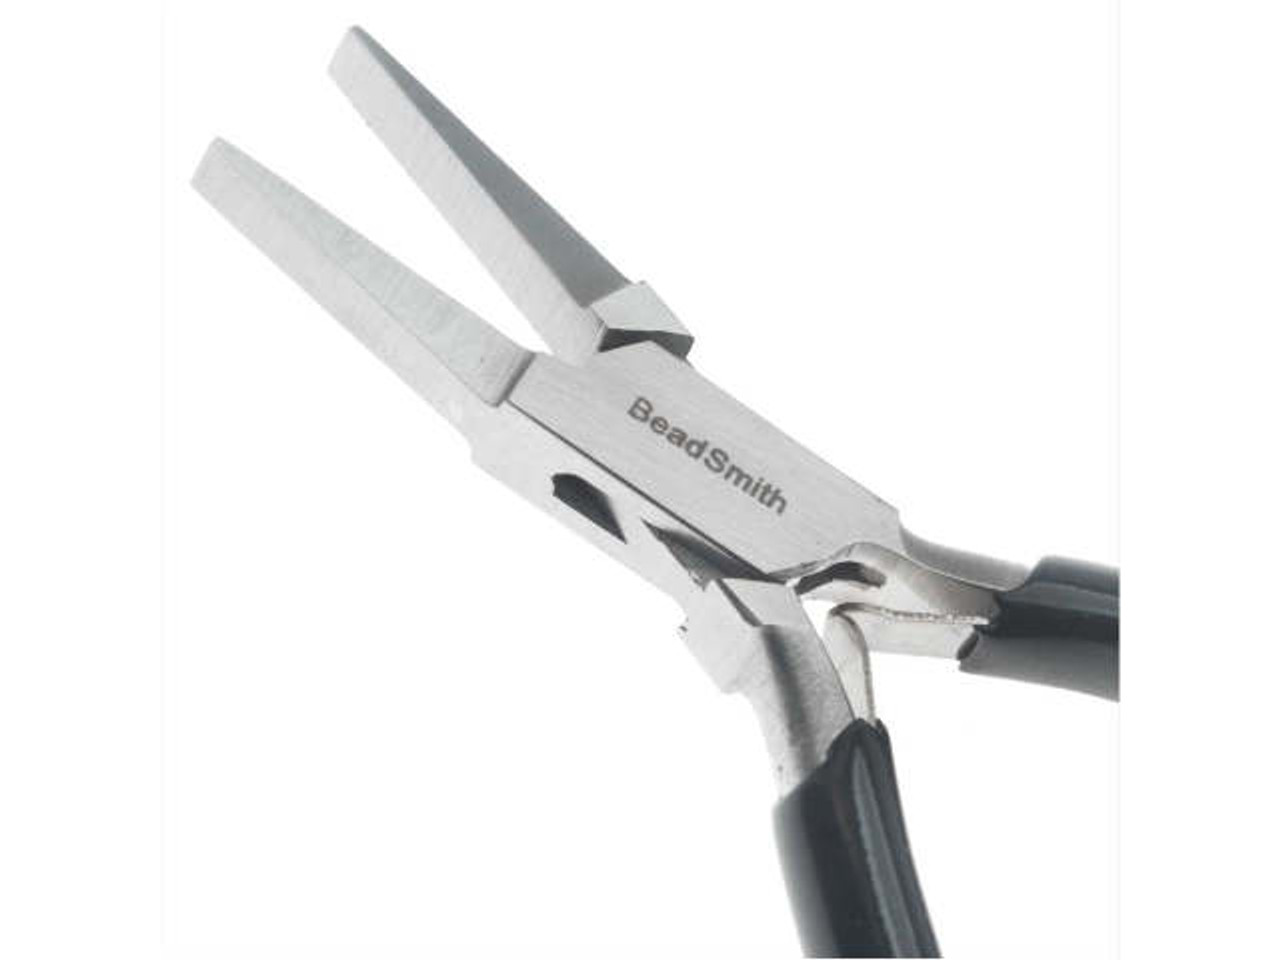 Tronex P541 Flat Nose Pliers With Long Smooth Jaw